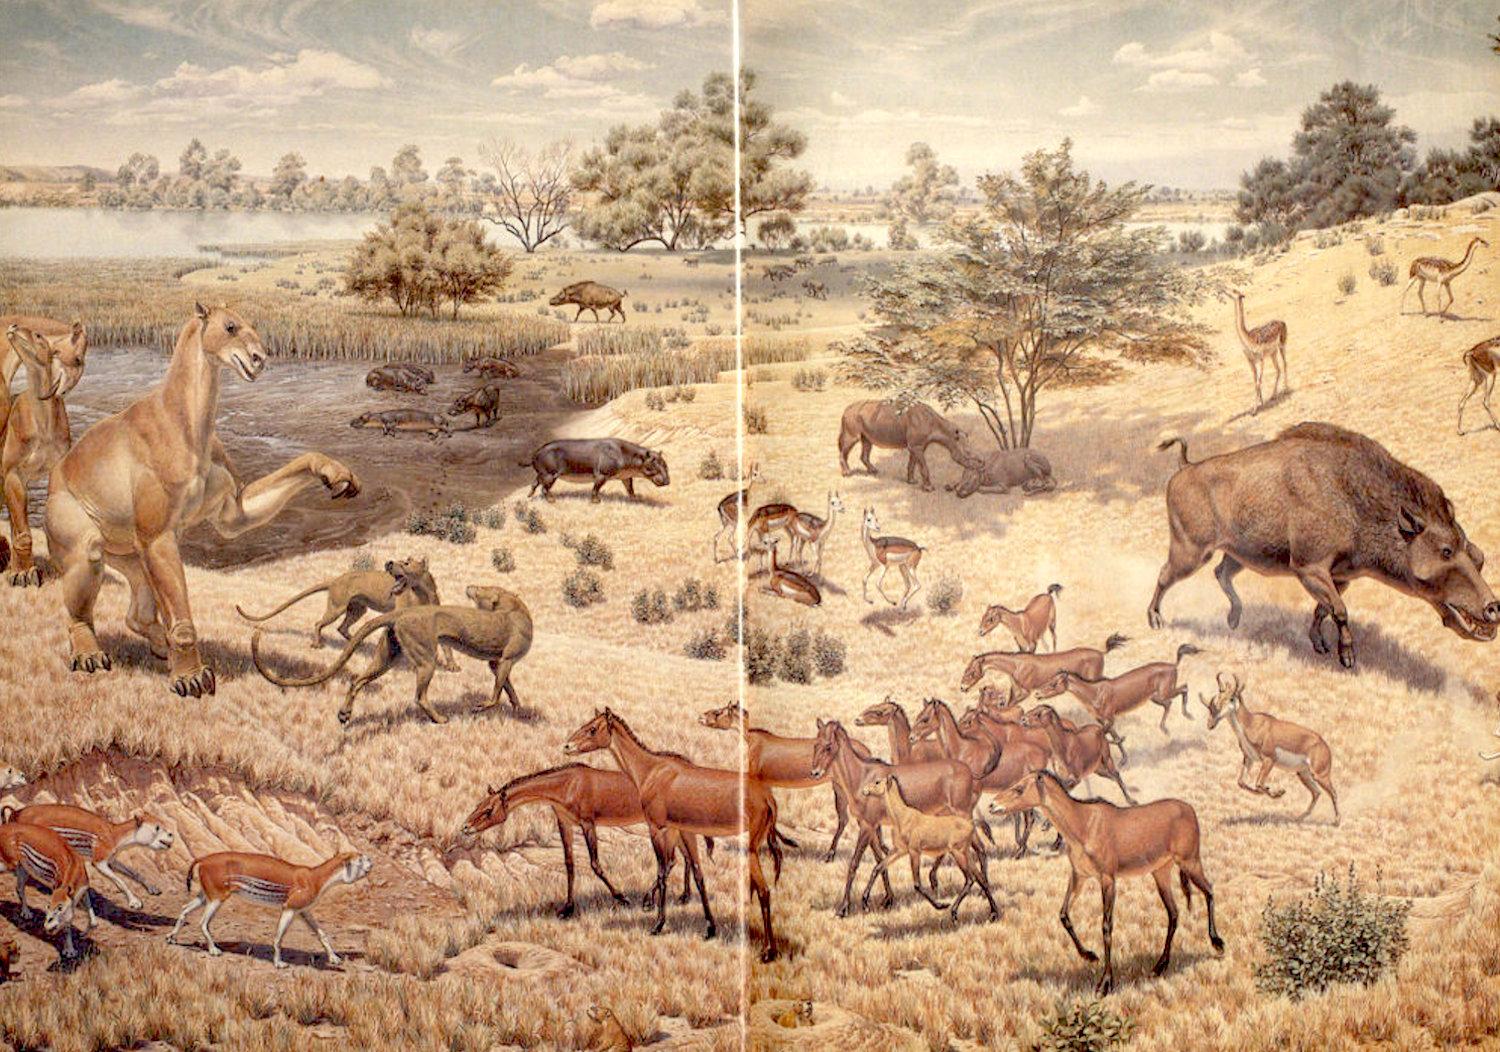 A National Museum of Natural History Mural depicts the fauna thought to exist on the landscape of Agate Fossil Beds National Monument during the Miocene epoch. 